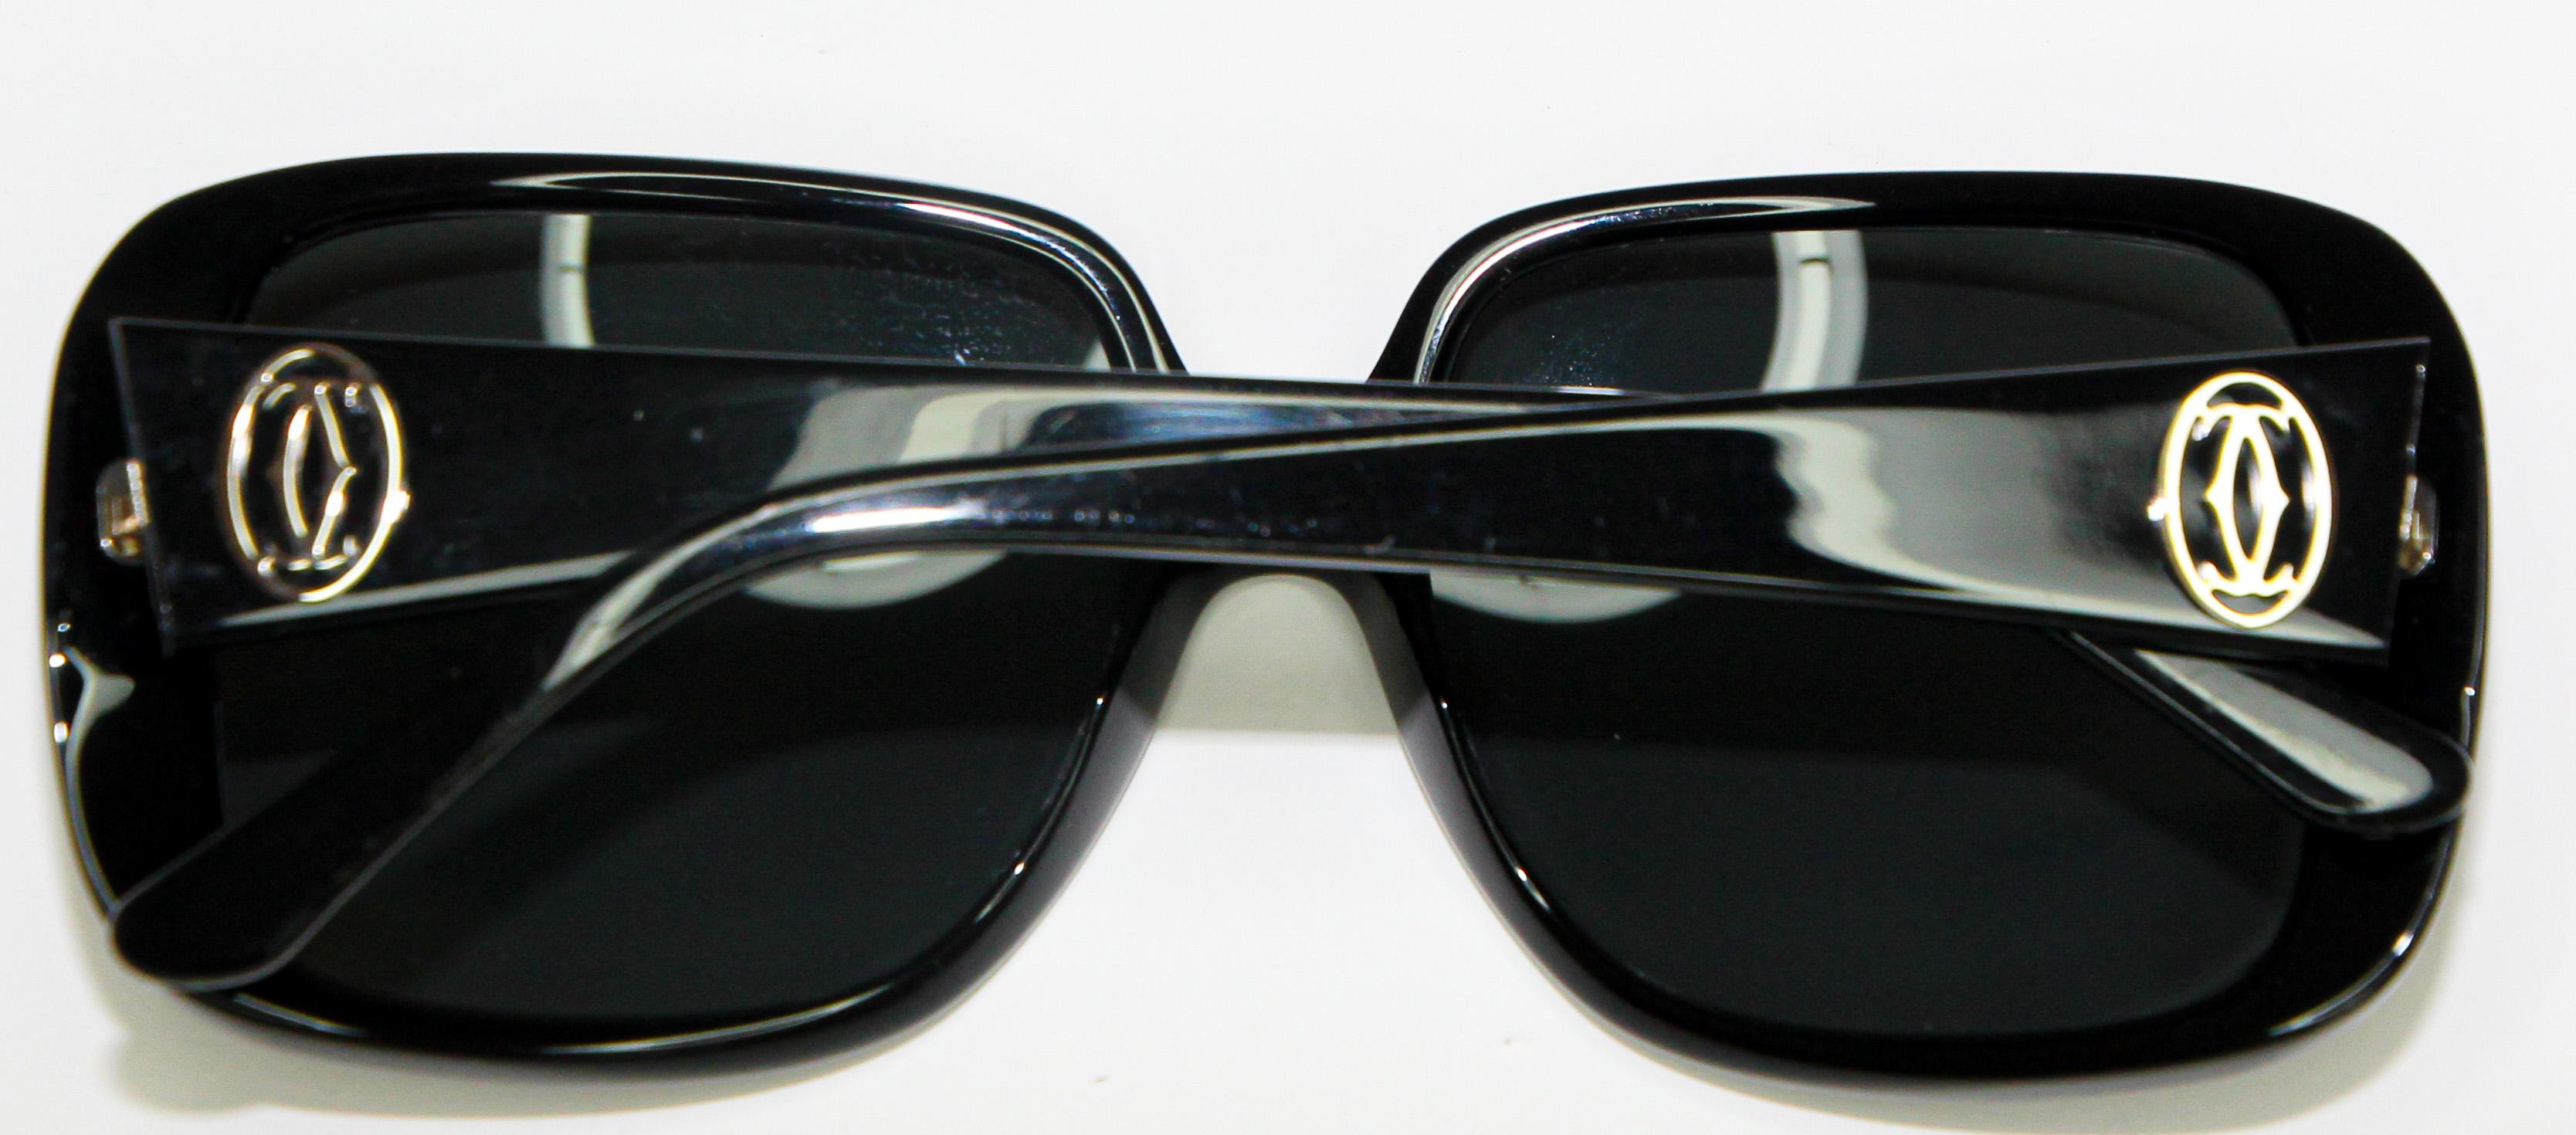 Cartier Vintage Black Sunglasses with Box, 1990 Silver Logo For Sale 3